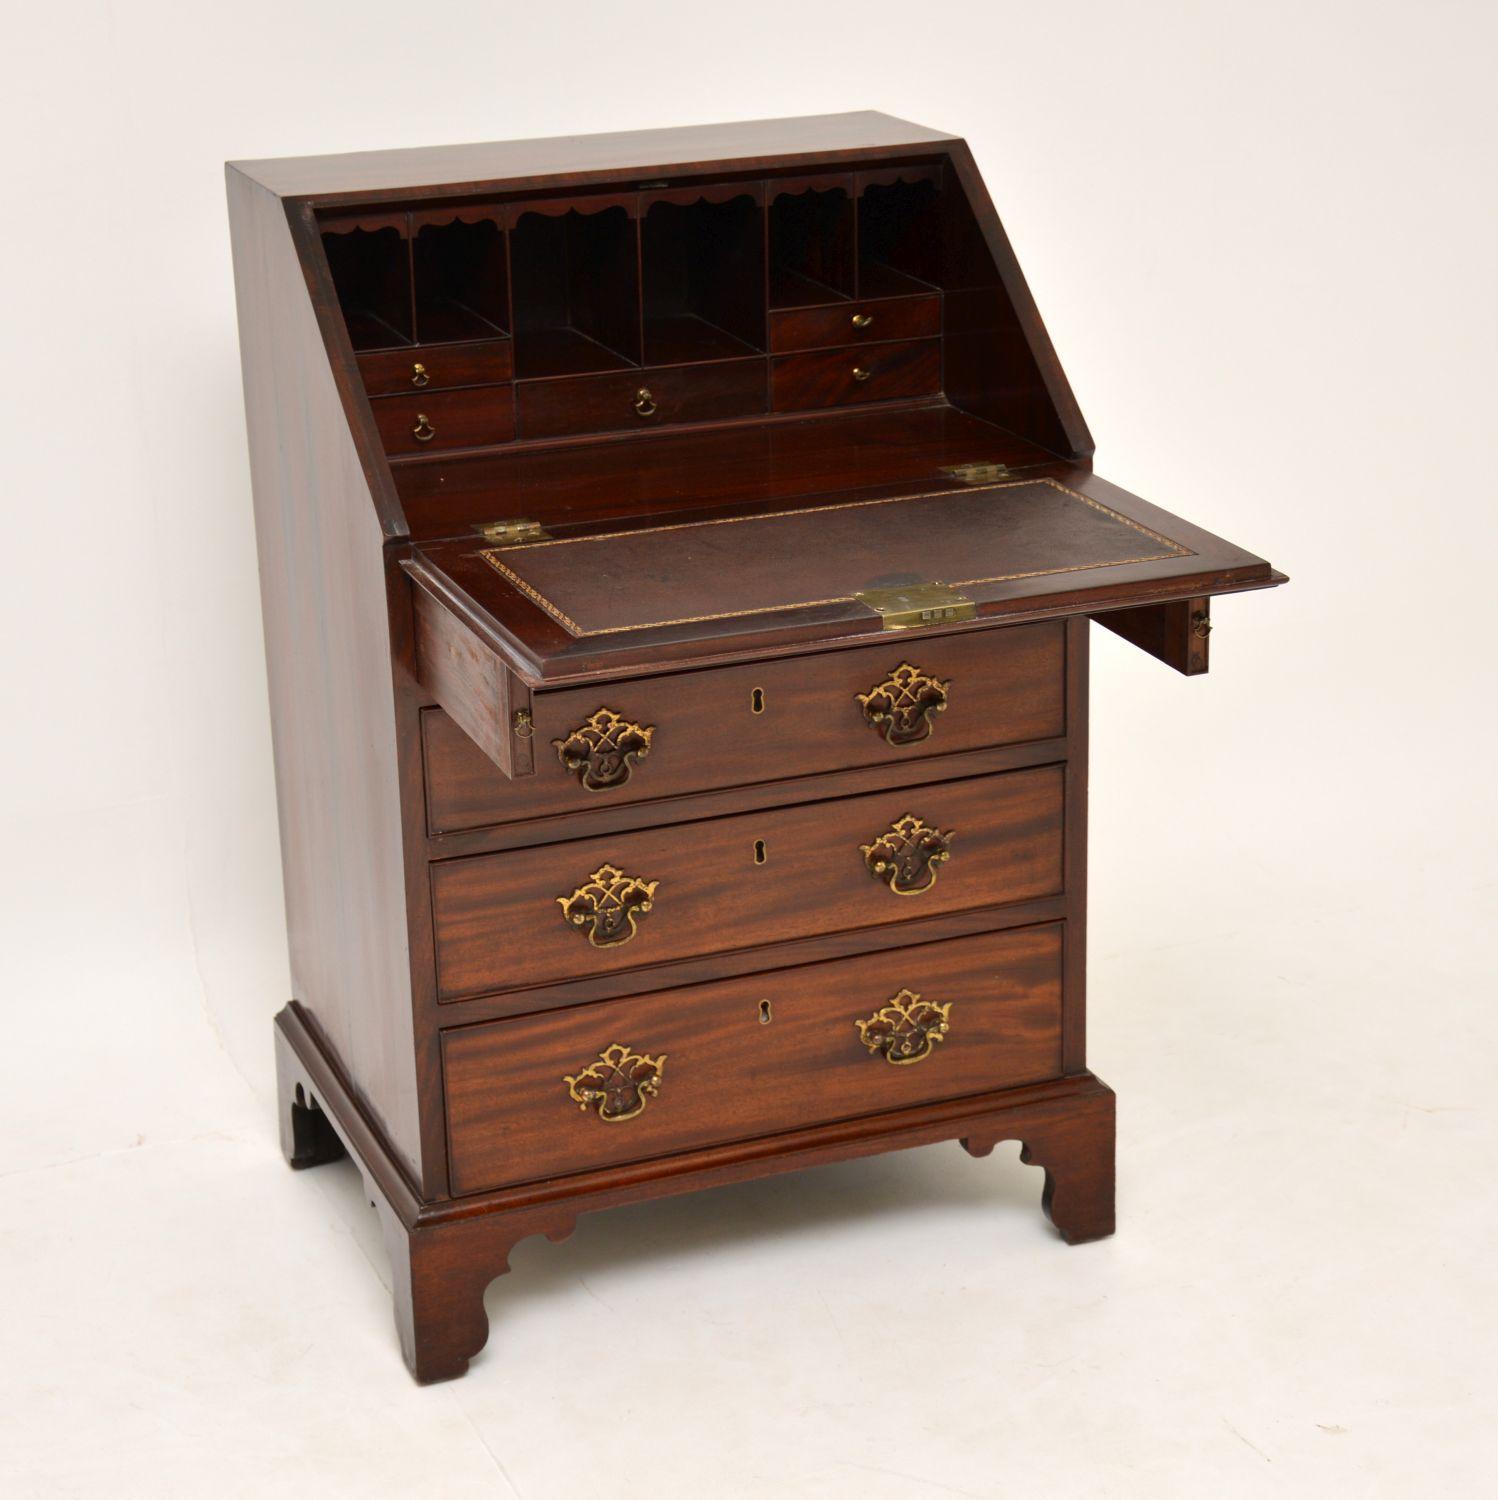 Antique George III mahogany bureau with nice slim proportions, in excellent condition and of high quality.

The bureau flap is cross banded and there are four drawers graduated in depth, with original brass handles and fine dovetails. The three